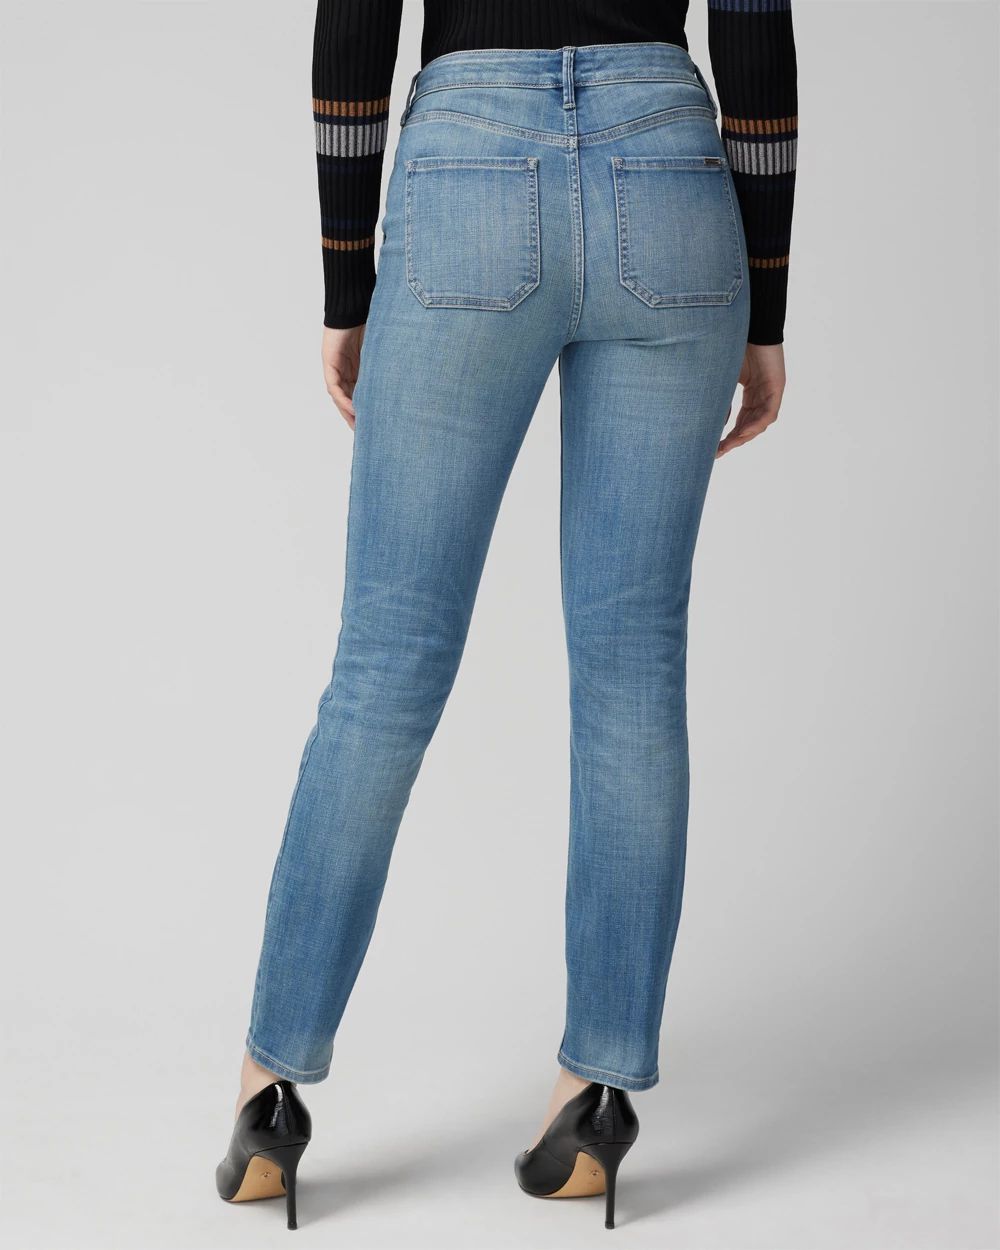 Petite High-Rise Every Day Soft Turnlock Pocket Slim Jeans click to view larger image.